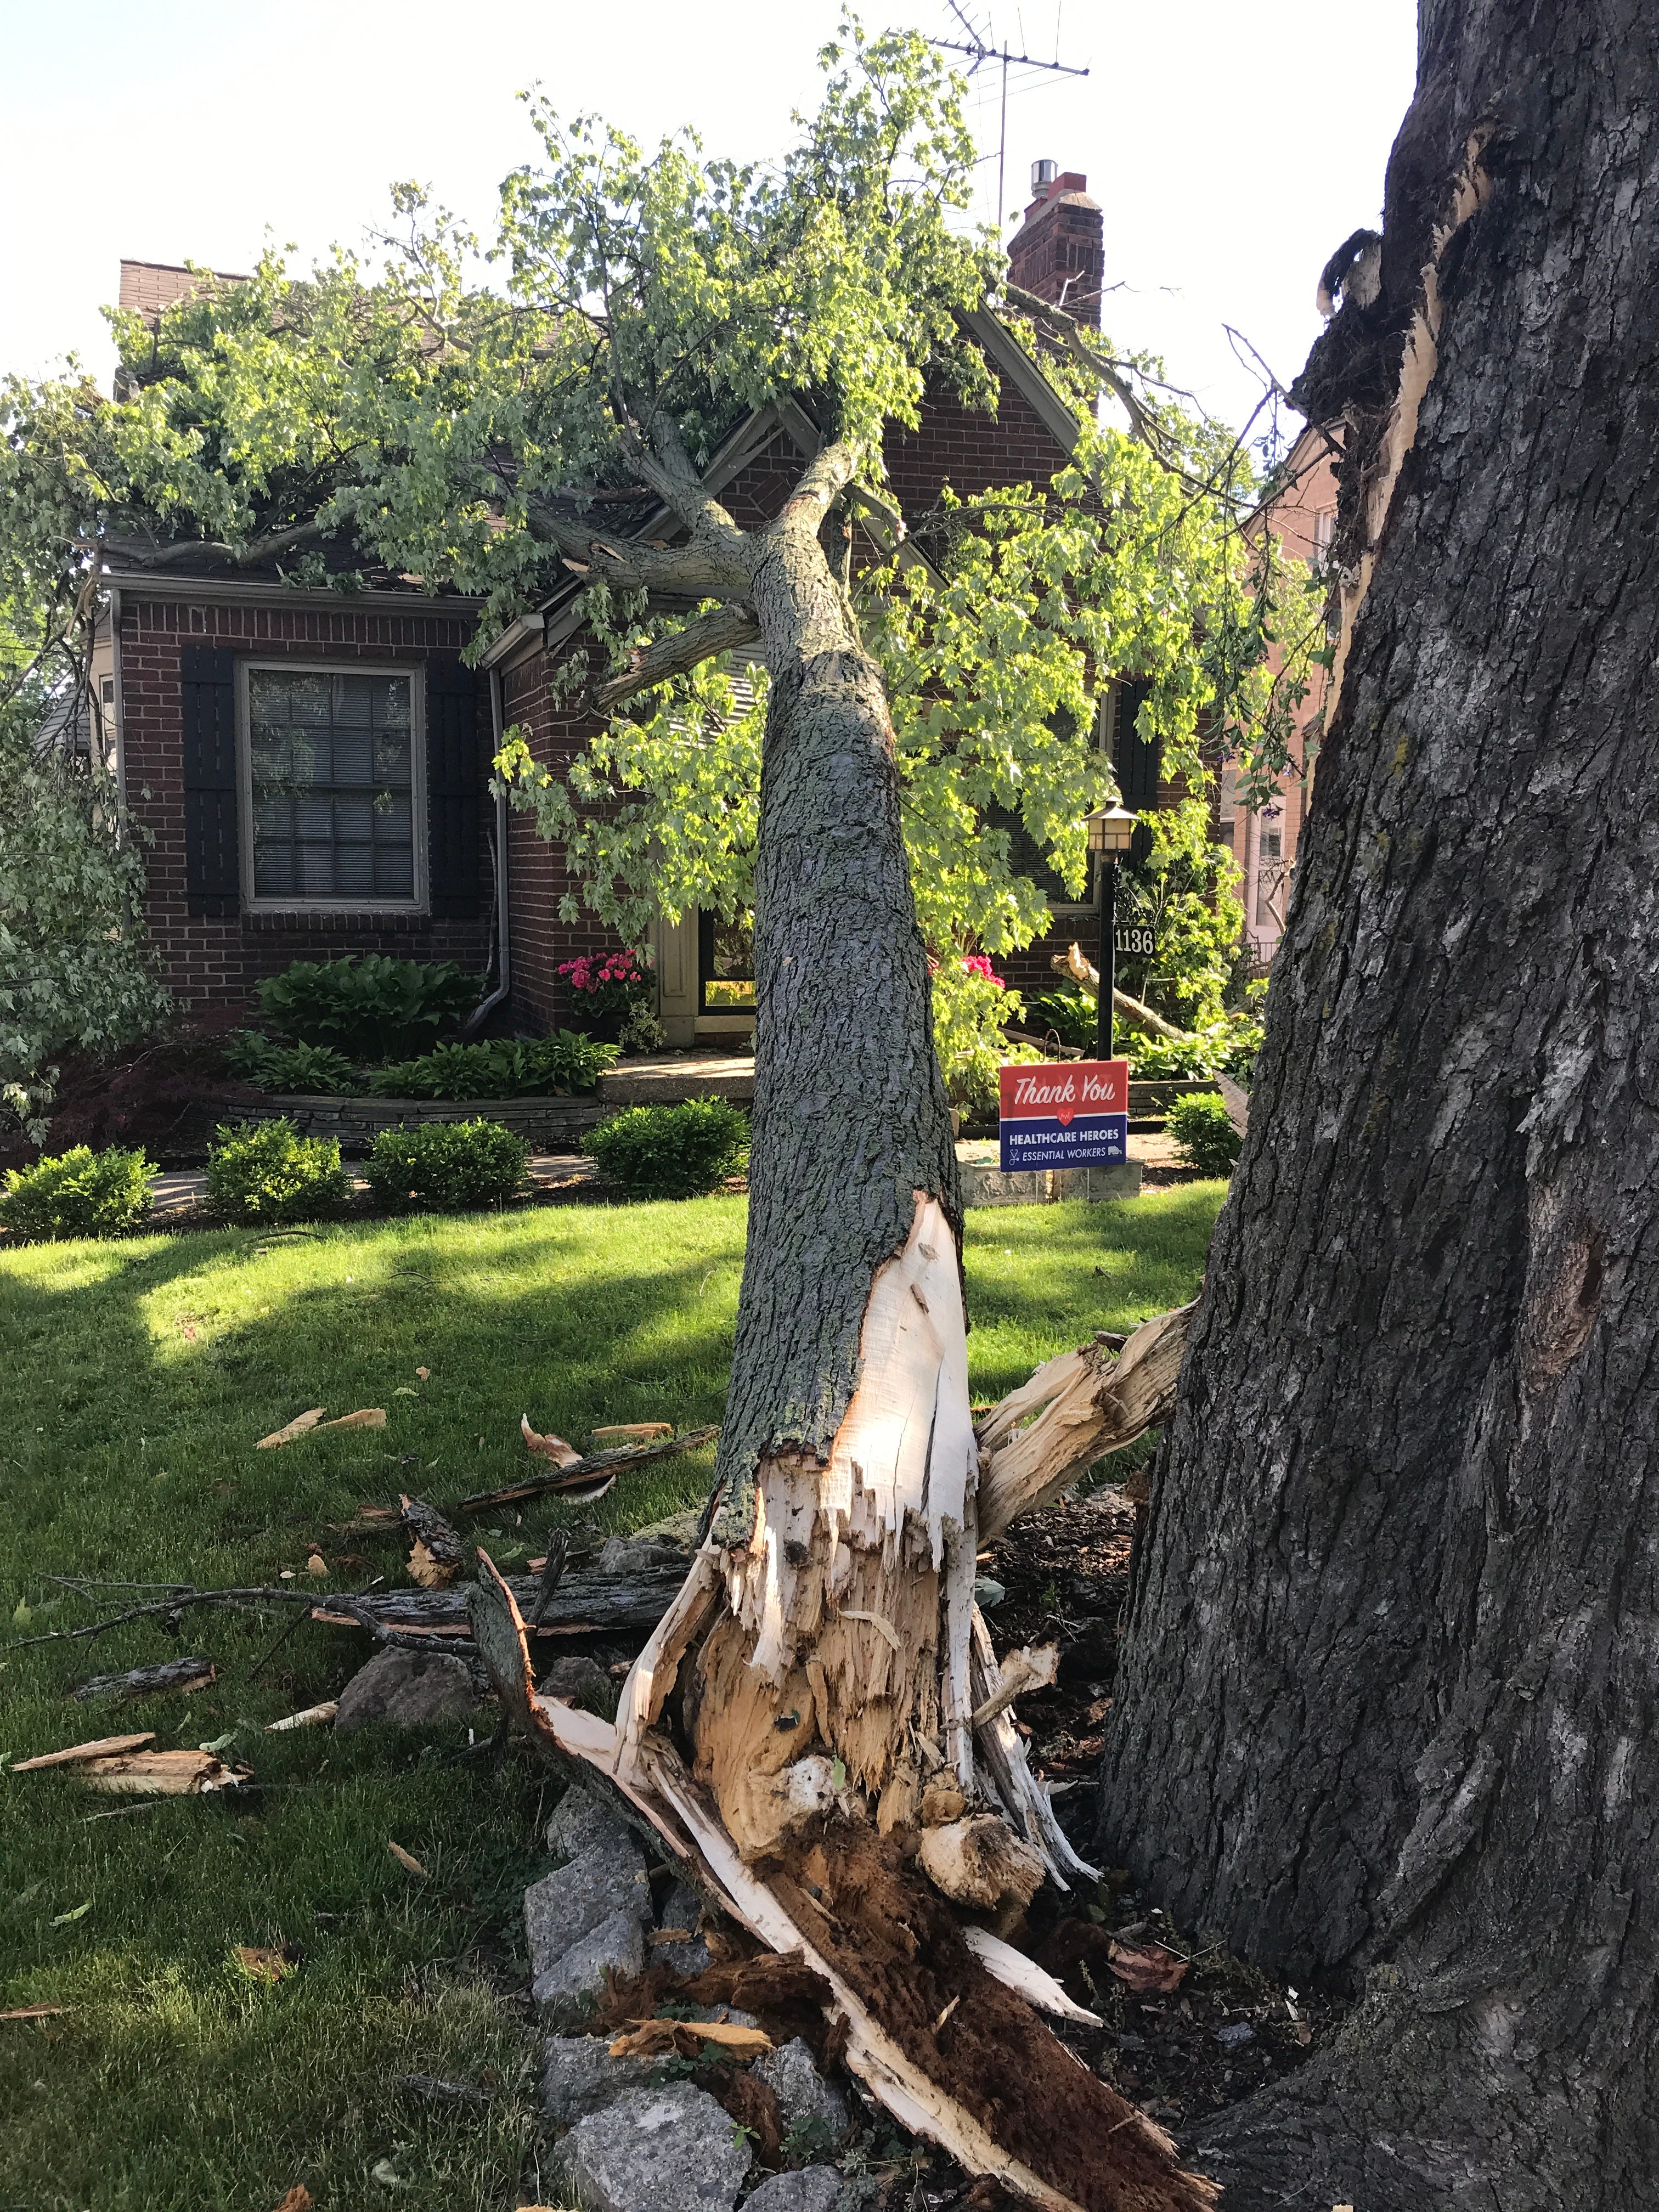 High winds caused a tree to fall on this house along Vernier Road in Grosse Pointe Woods.